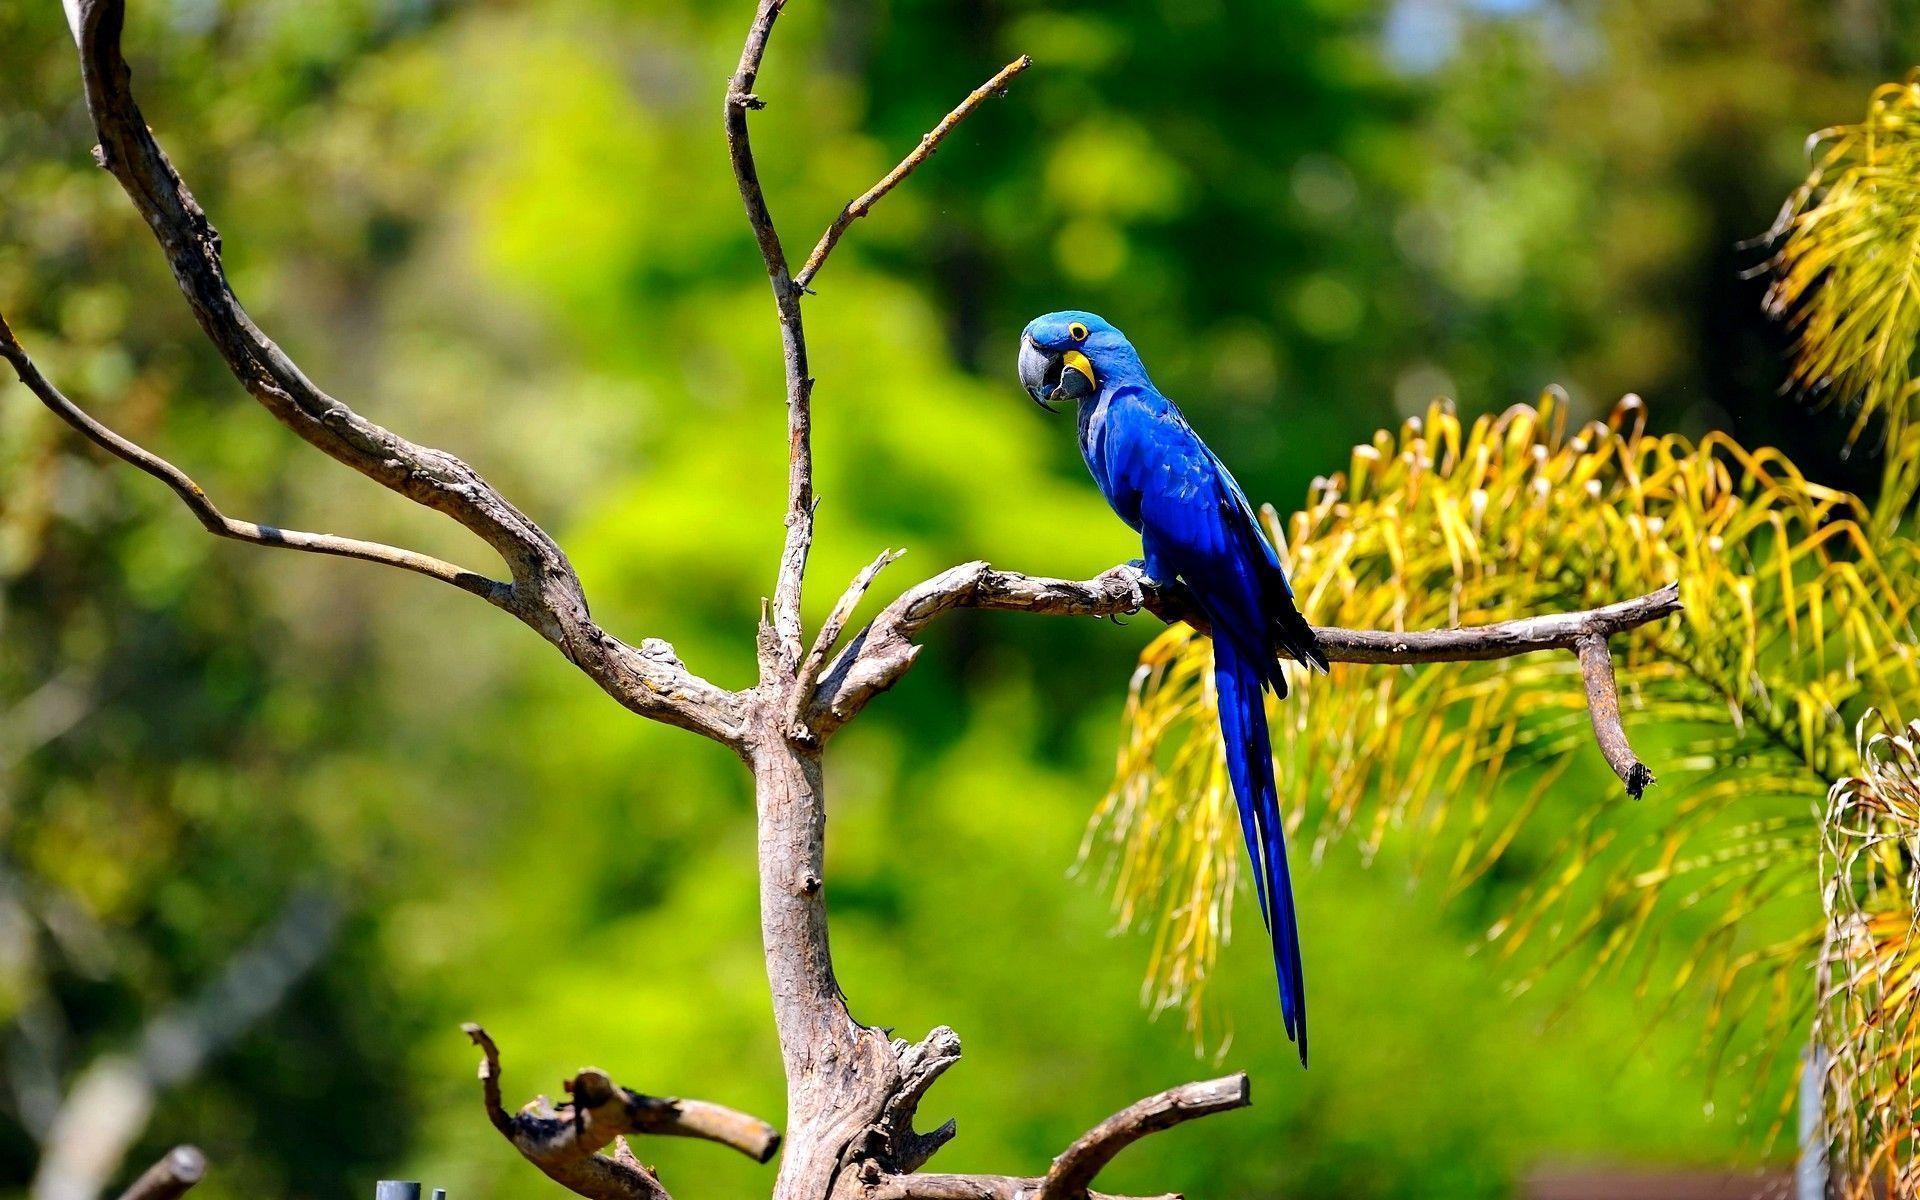 Hyacinth Macaw Wallpapers